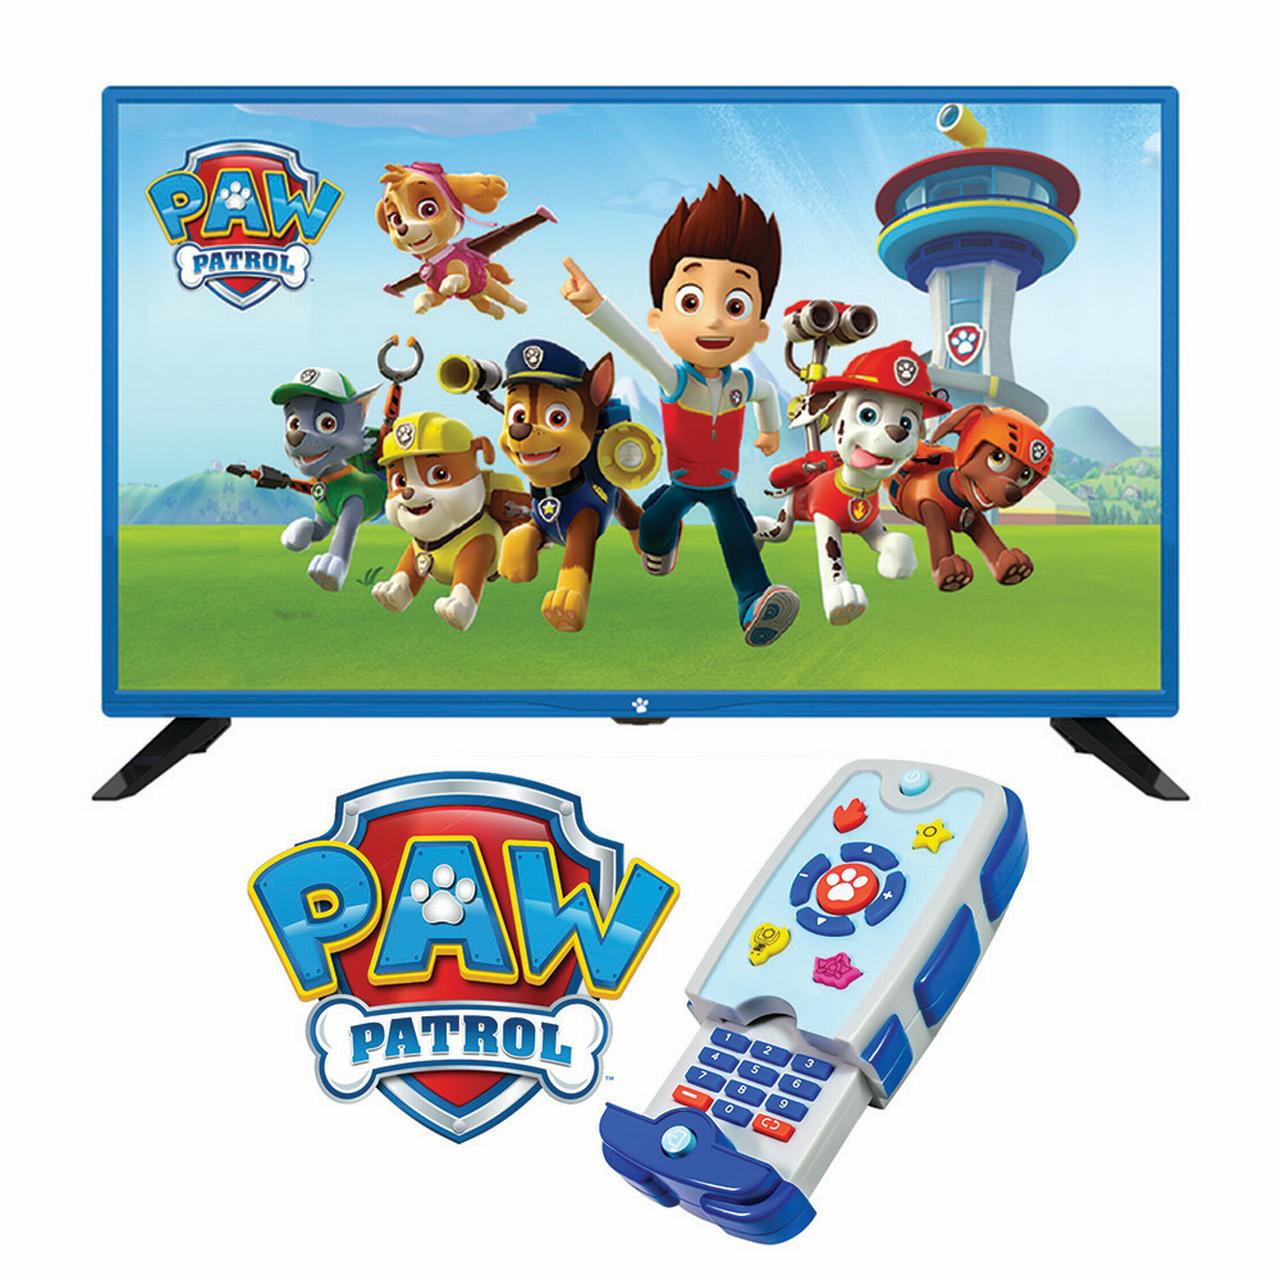 32" Paw Patrol HD (720p) LED TV with Built-In TV Tuner (PTV3200) - image 1 of 6